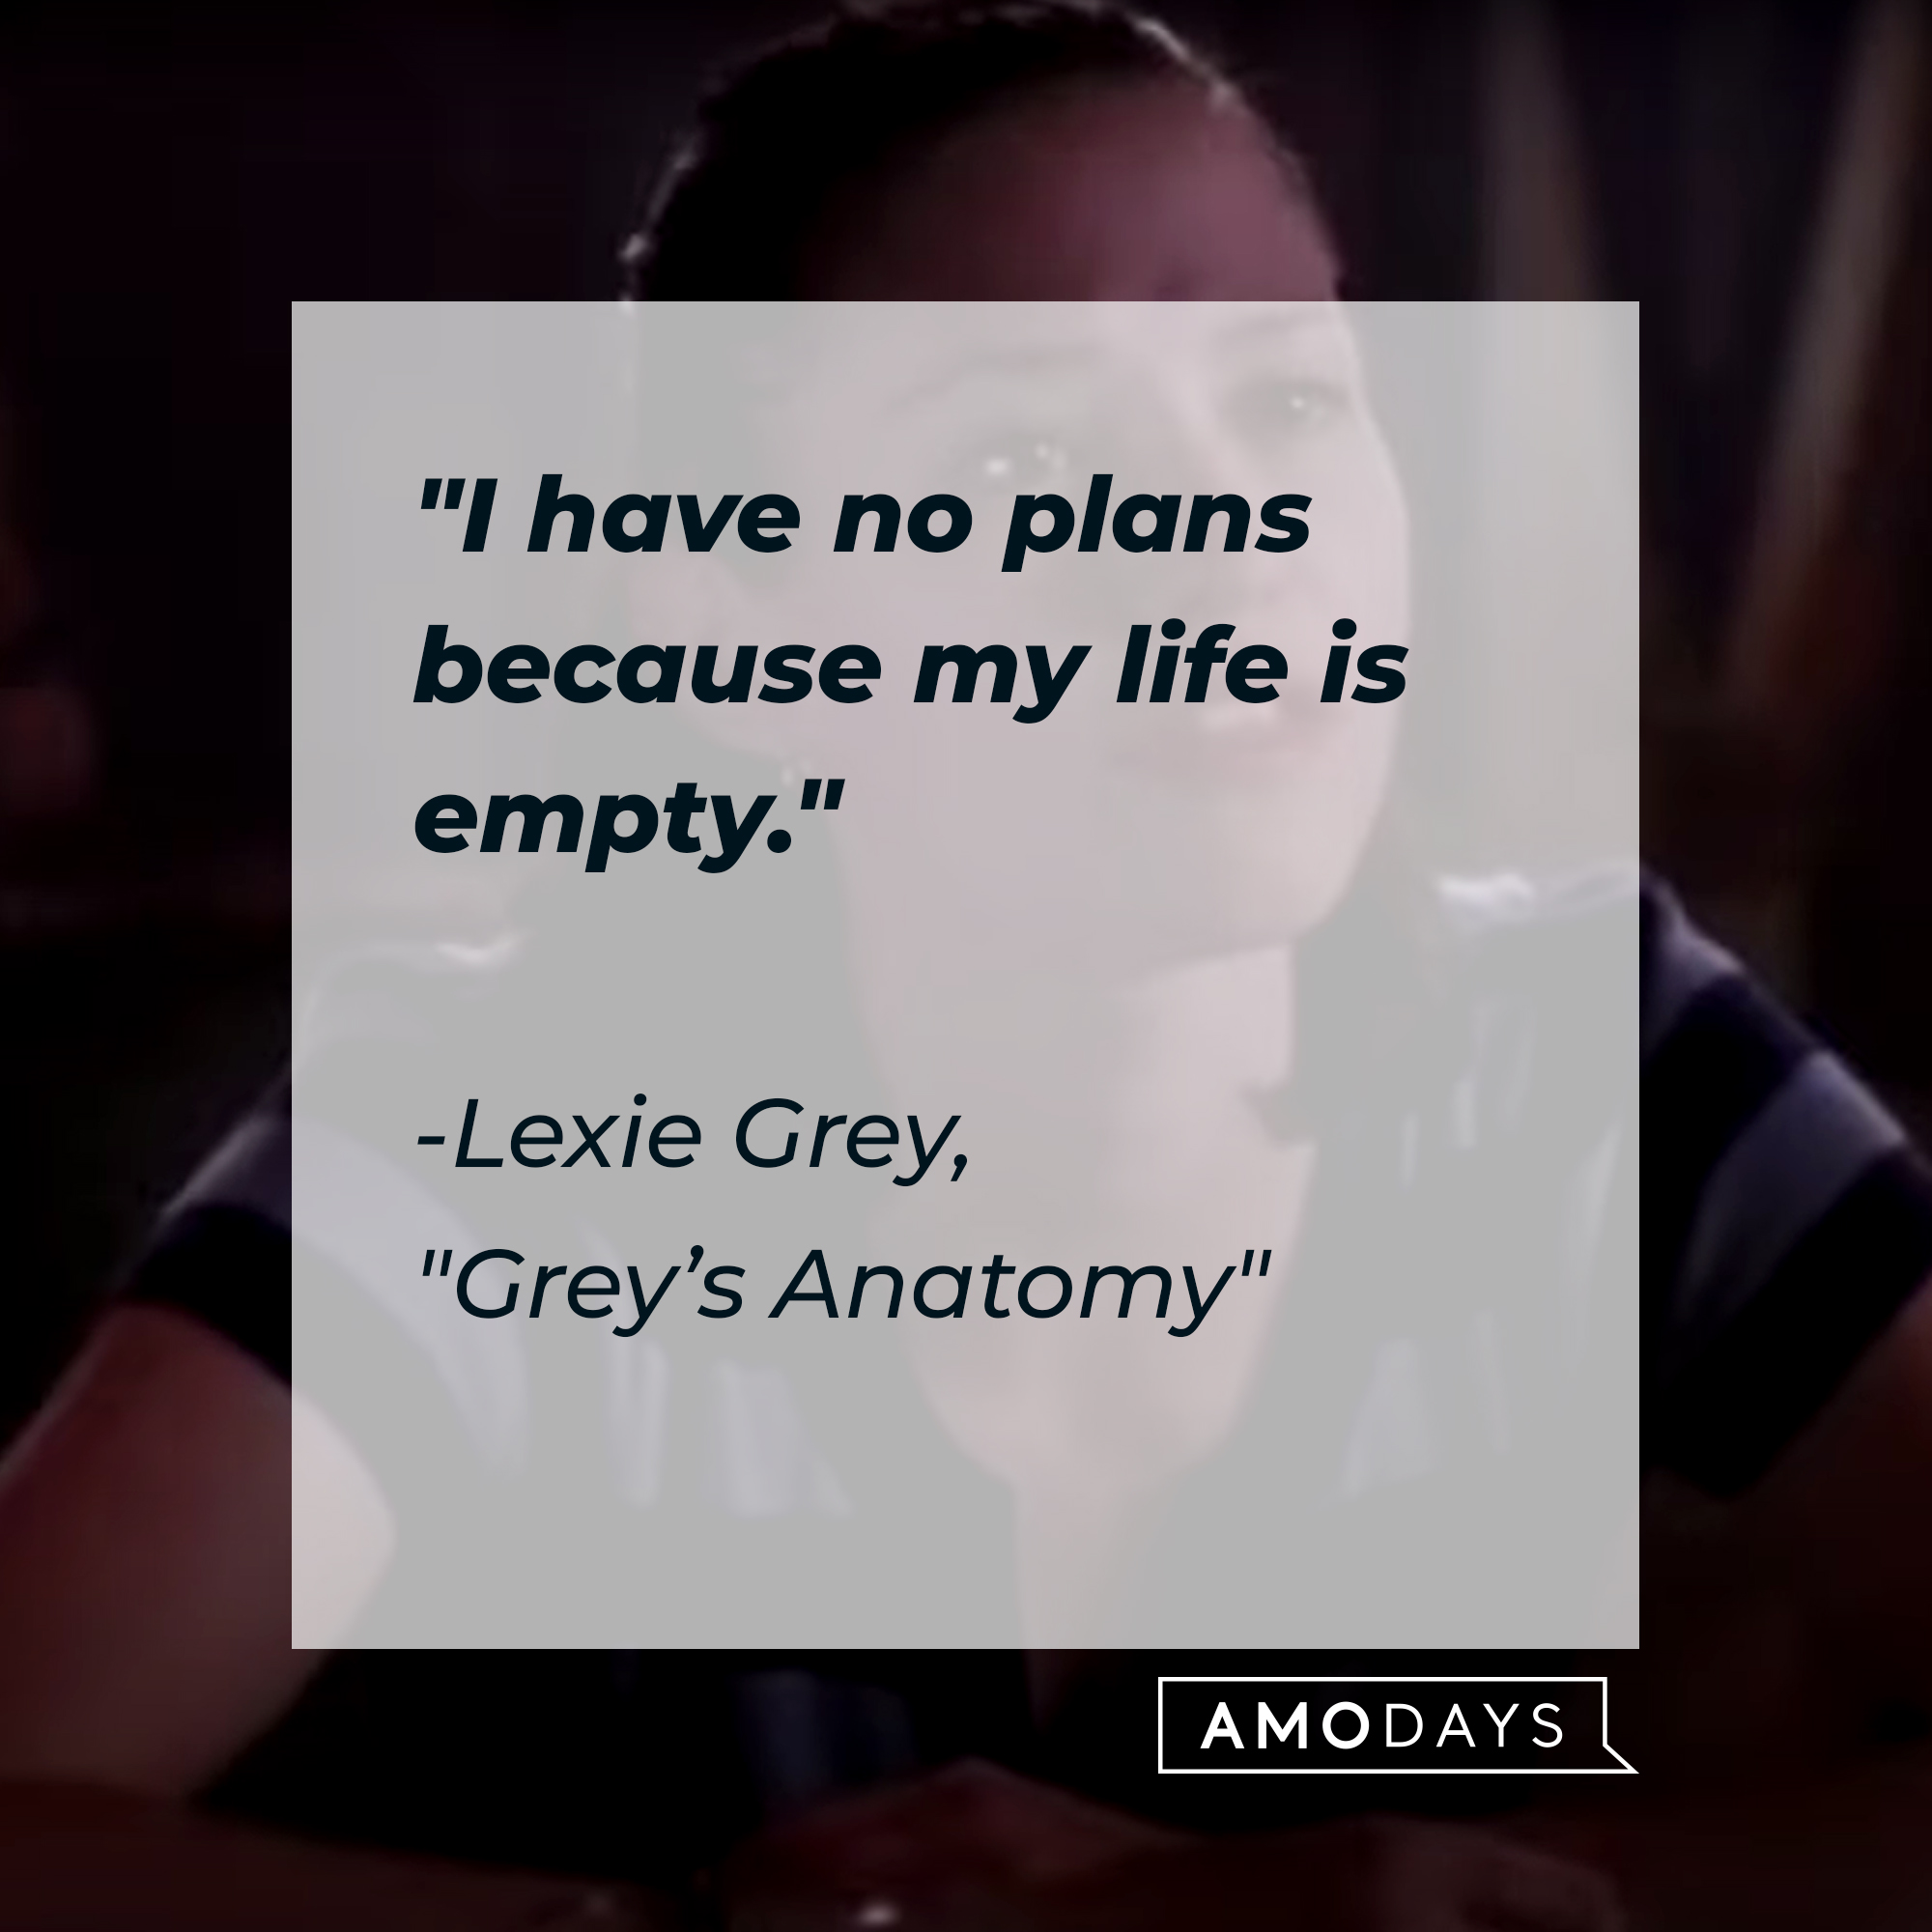 Lexie Grey with her quote: "I have no plans because my life is empty." | Source: Facebook.com/GreysAnatomy